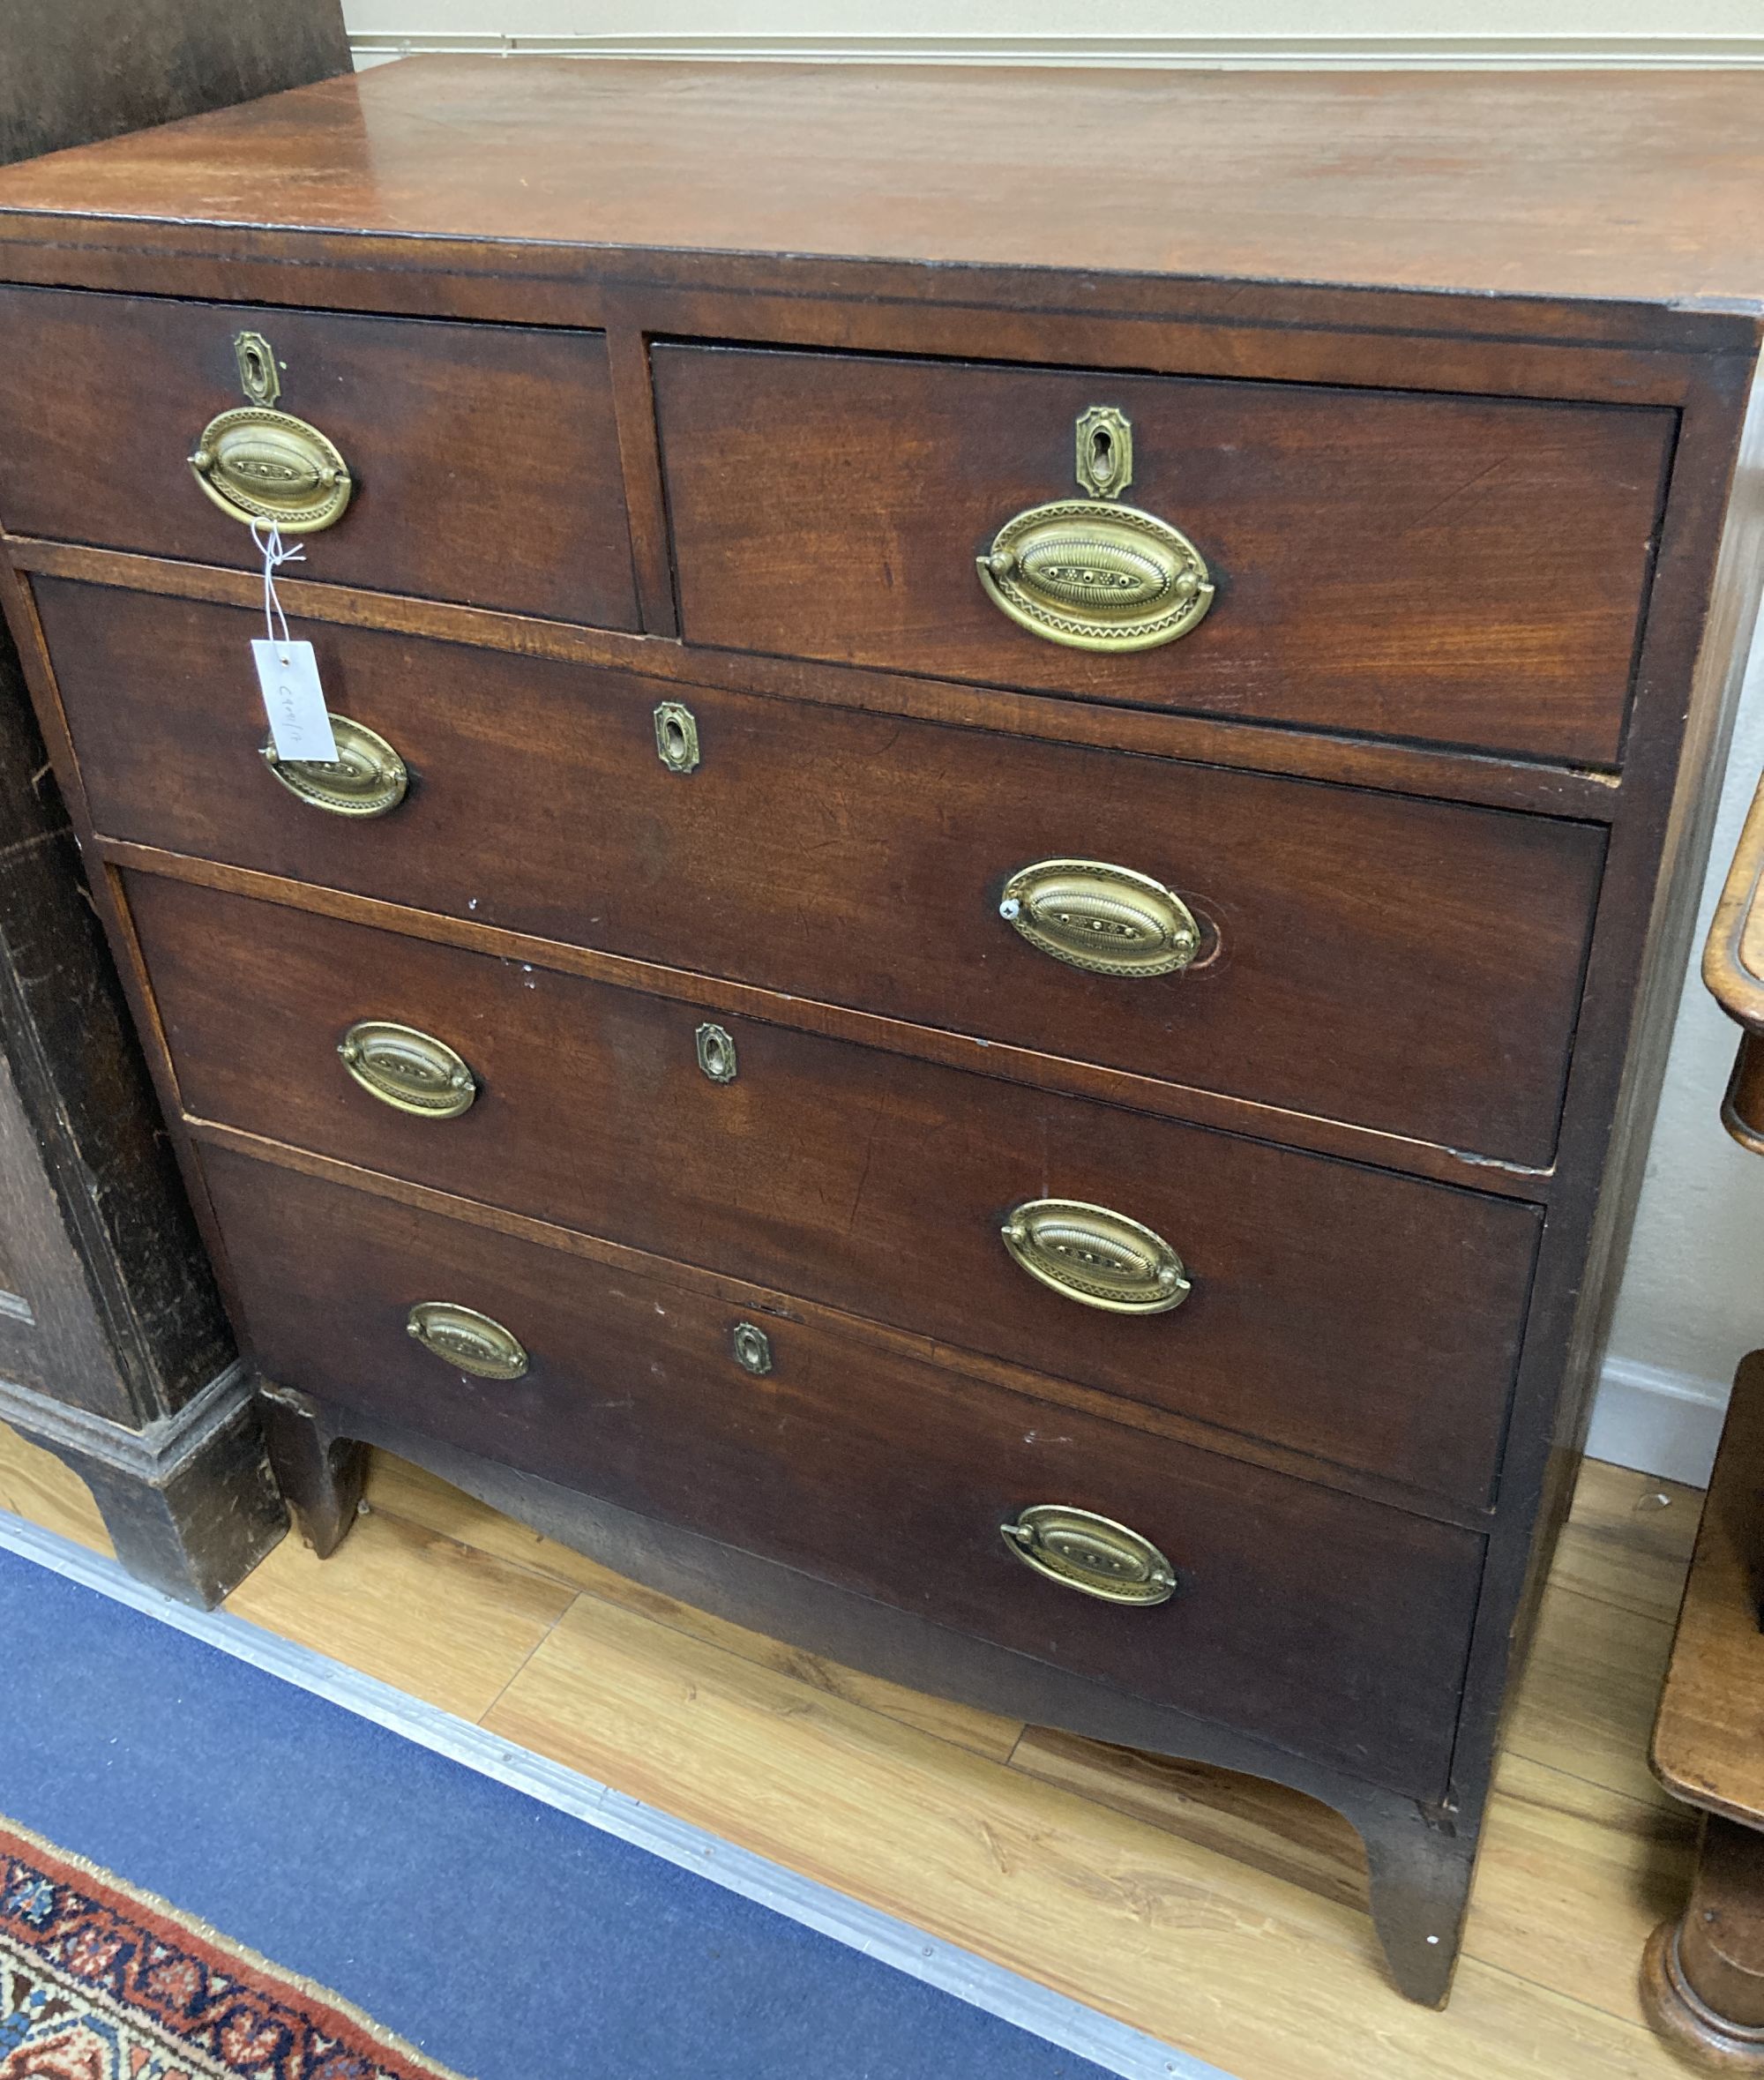 A Regency mahogany and pine straight front chest of drawers, width 92cm, depth 46cm, height 104cm